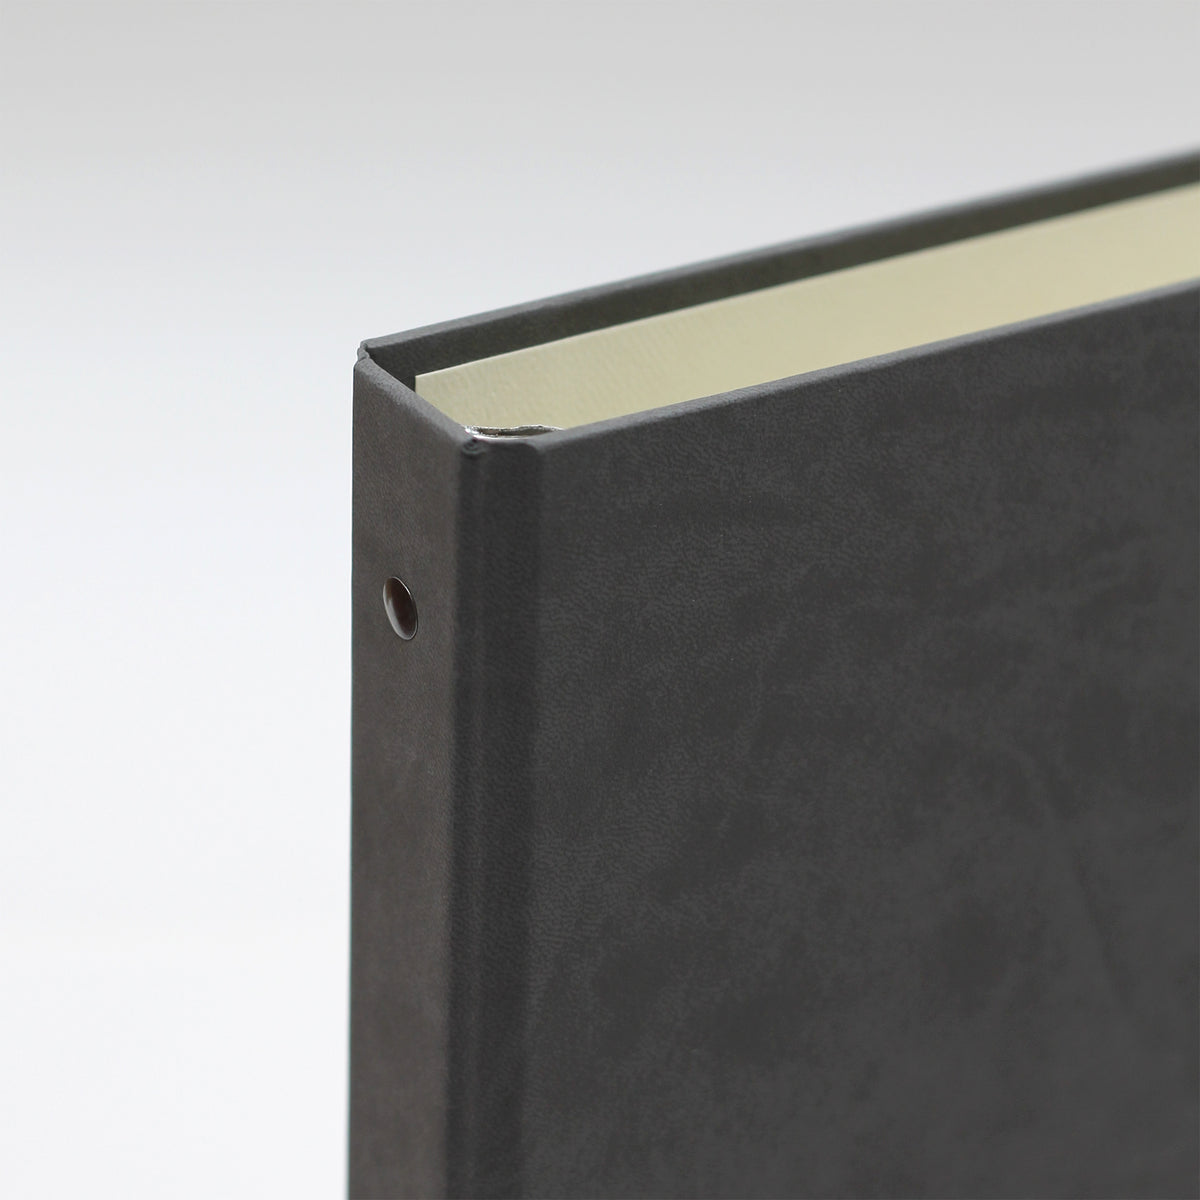 Medium Photo Binder | for 4 x 6 photos | with Slate Vegan Leather Cover